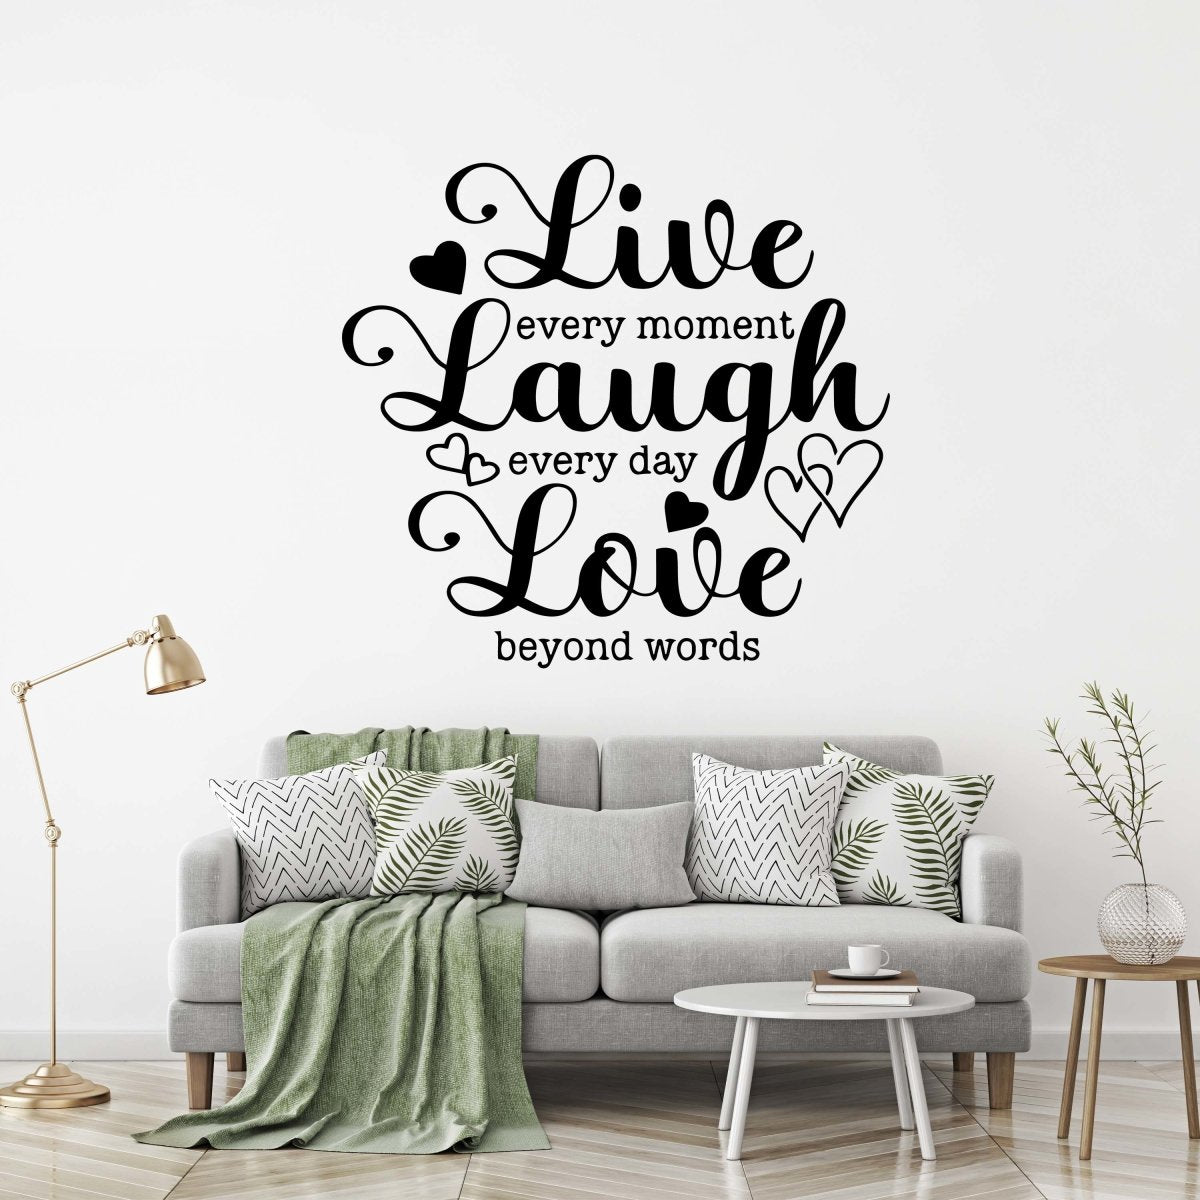 Discover the Live Love WT00000016 wall saying Laugh tattoo